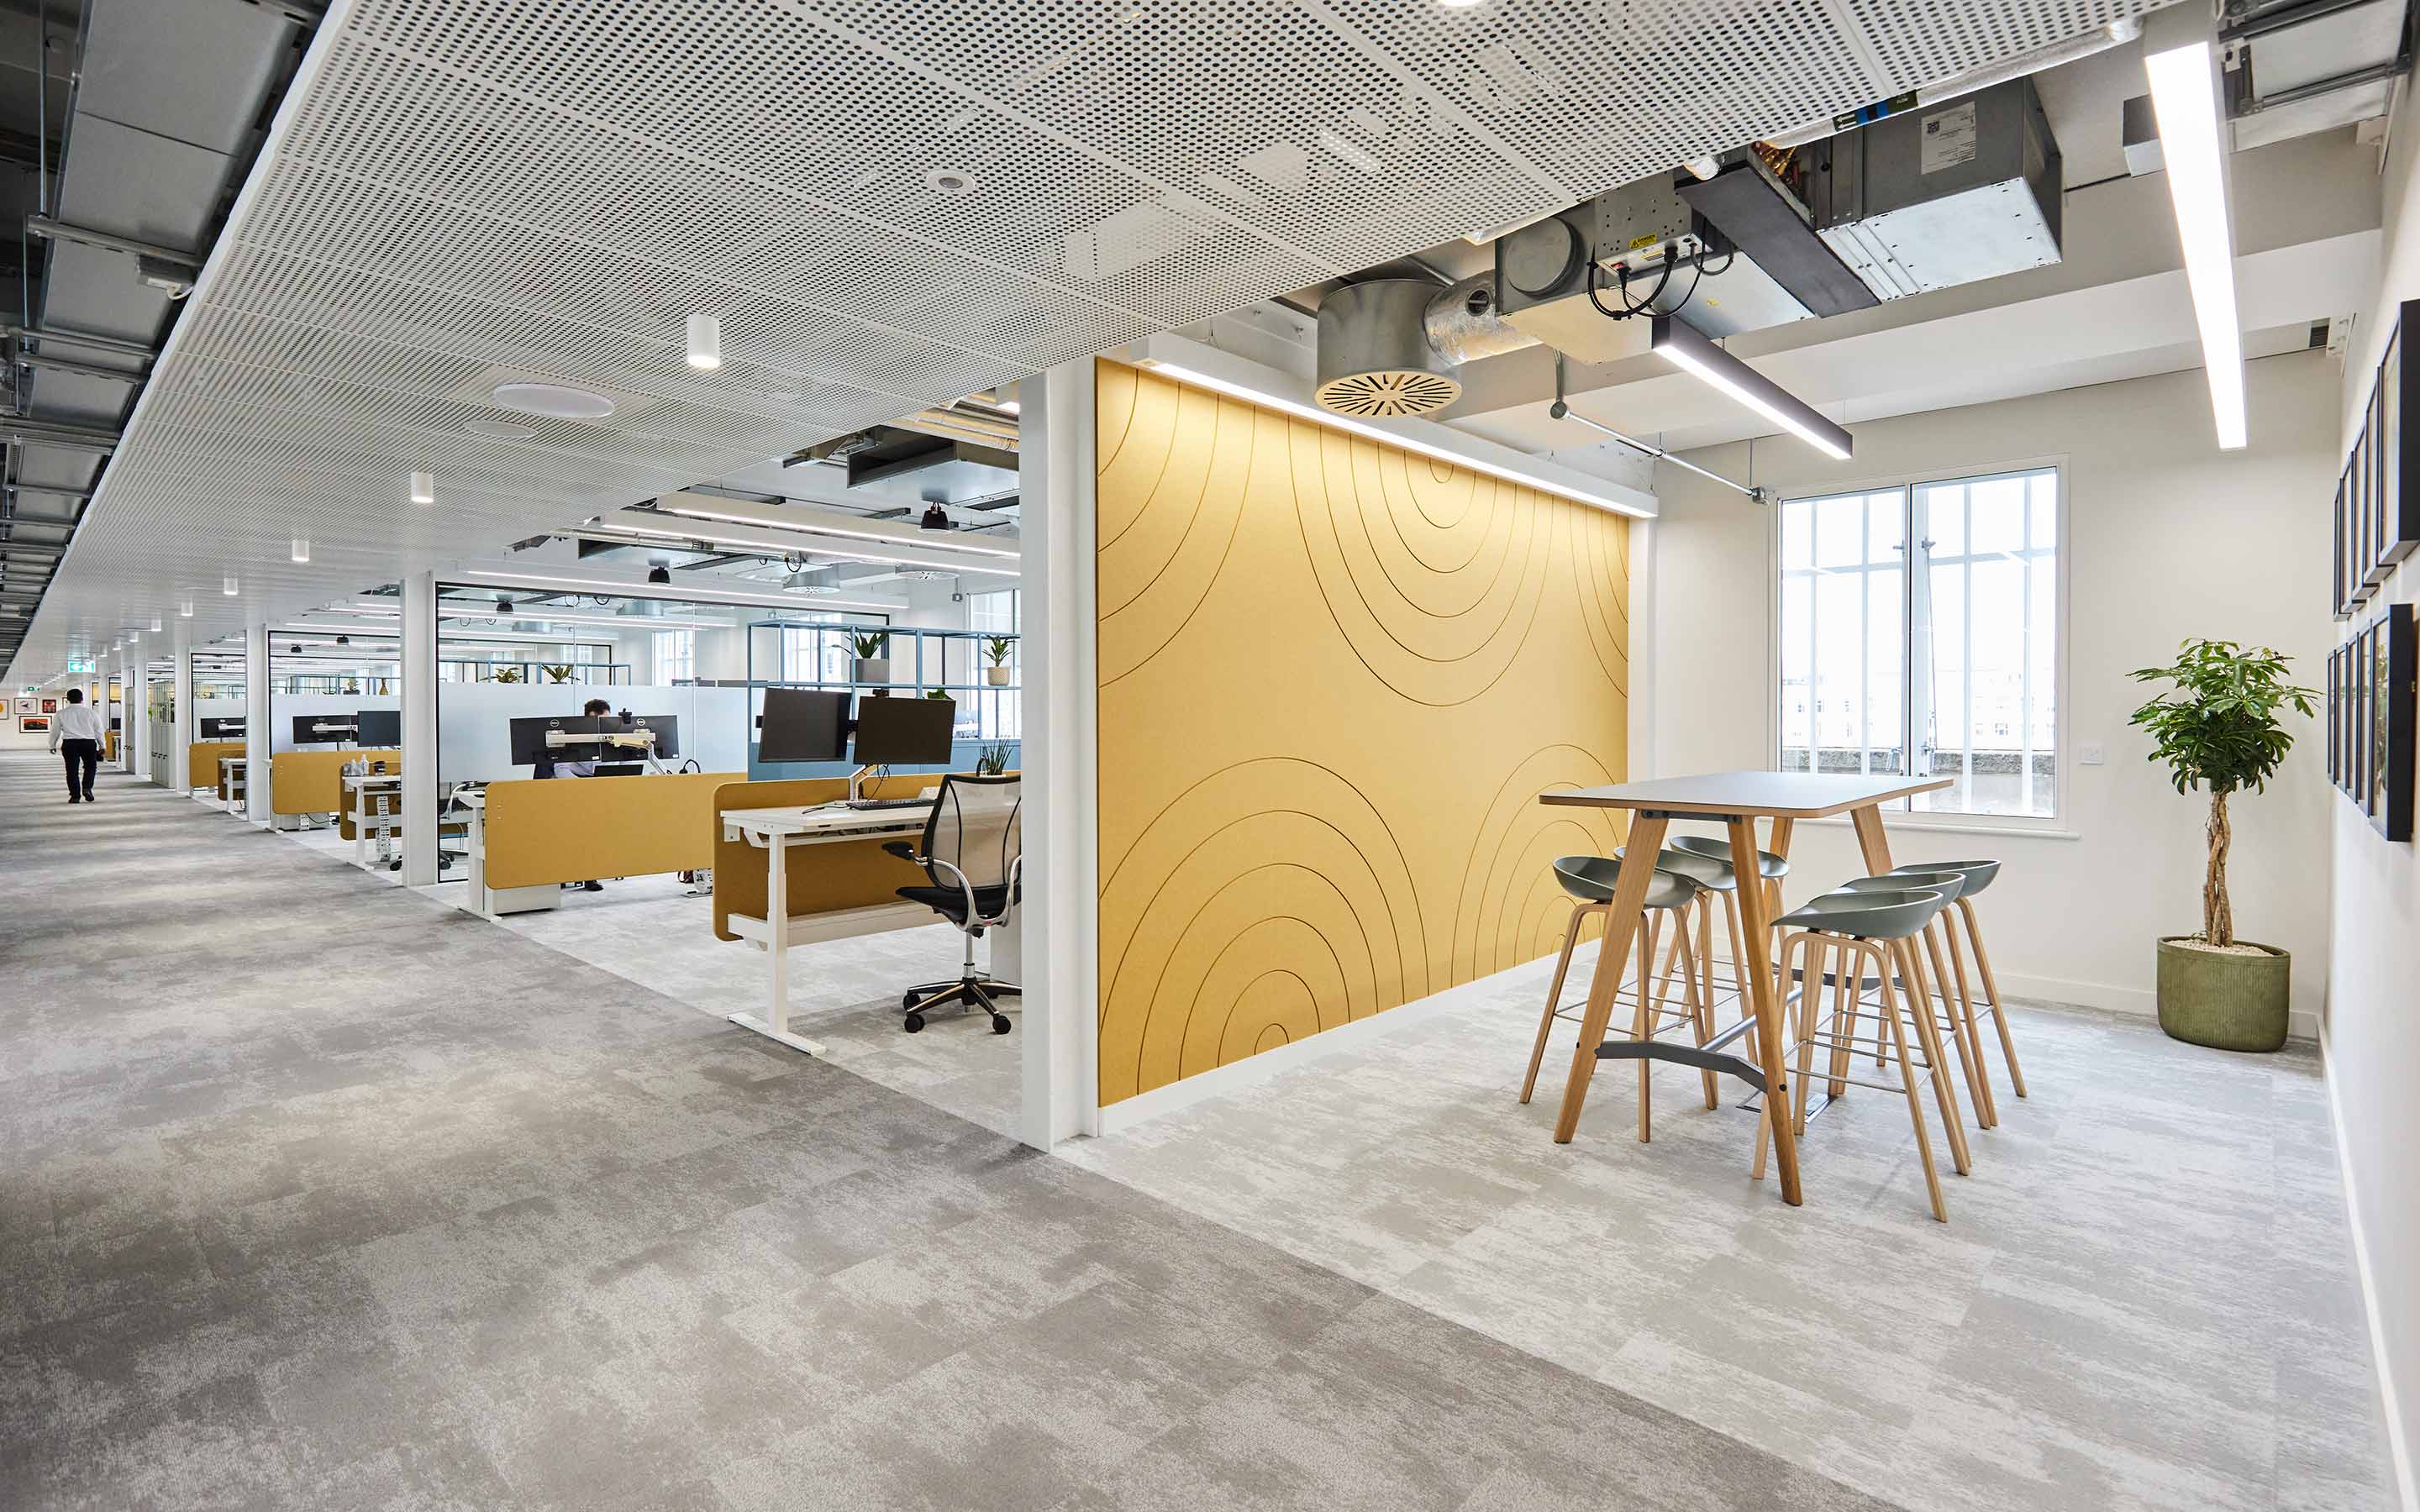 A collaboration area, complete with a high table and stools, acoustic panels and a yellow wall